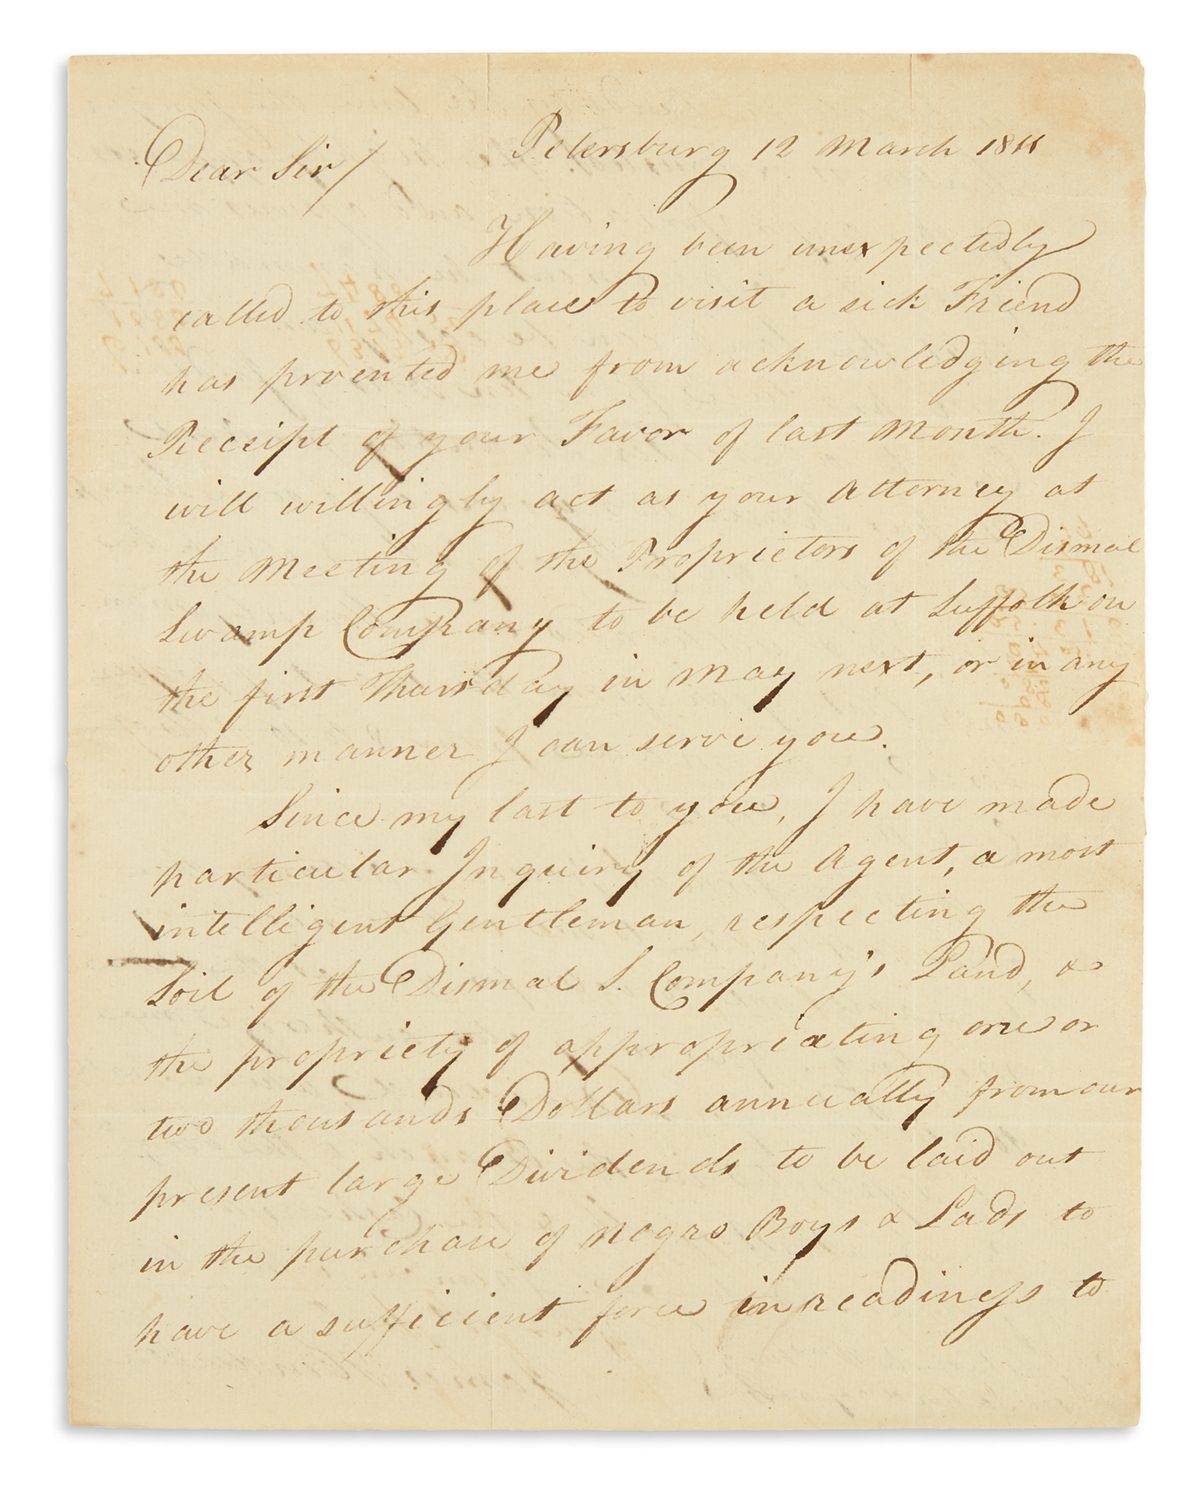 (SLAVERY AND ABOLITION.) Henderson, James. Letter to George Washingtons nephew regarding the purchase of slaves.